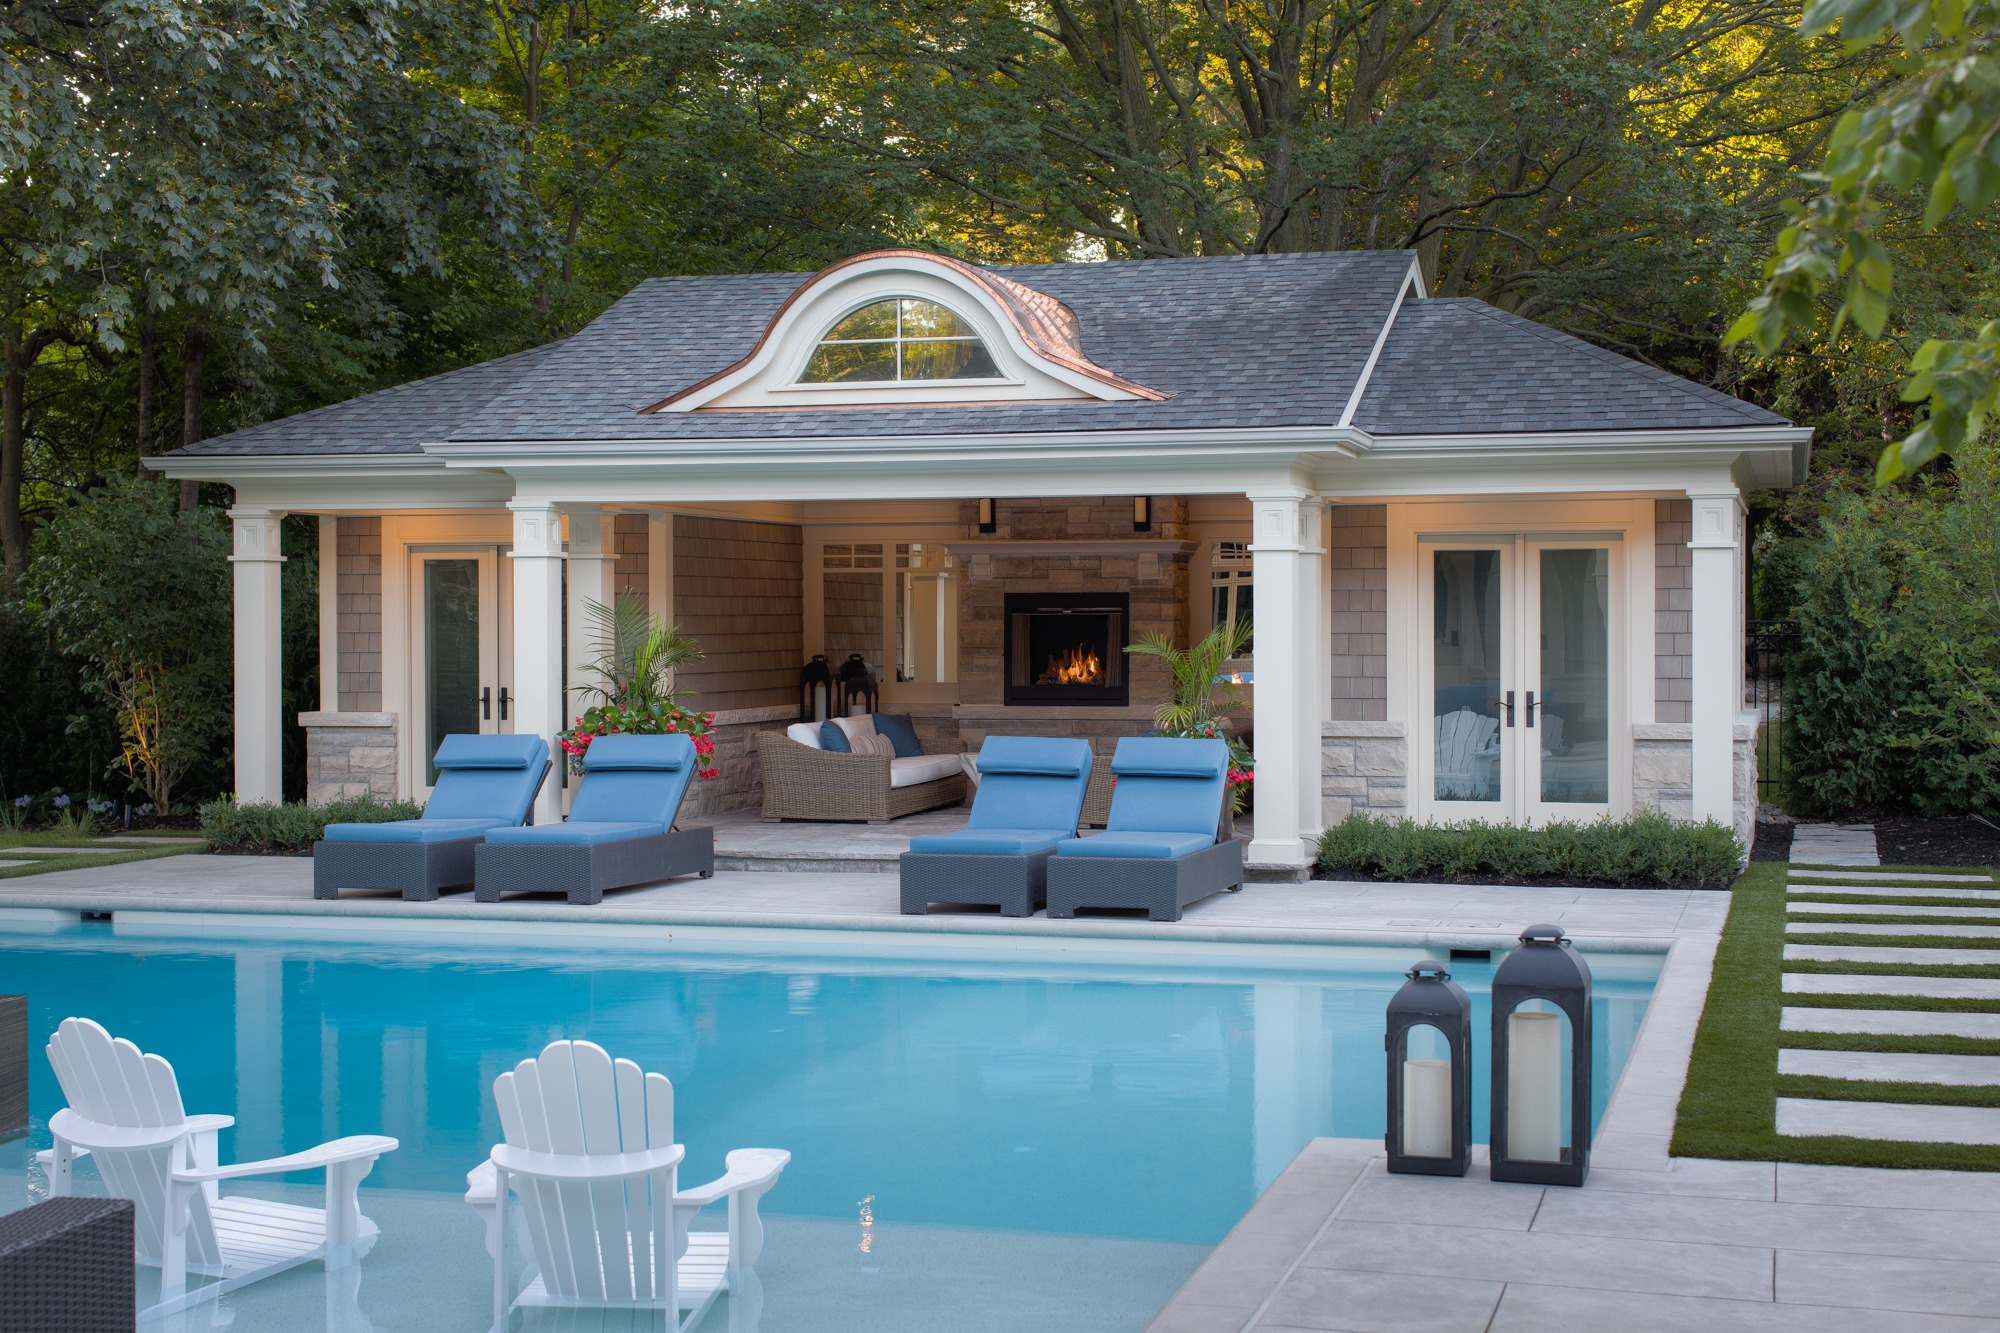 A luxurious pool house with a lit fireplace, surrounded by lounge chairs, a swimming pool, and lanterns, nestled in a serene, landscaped backyard.